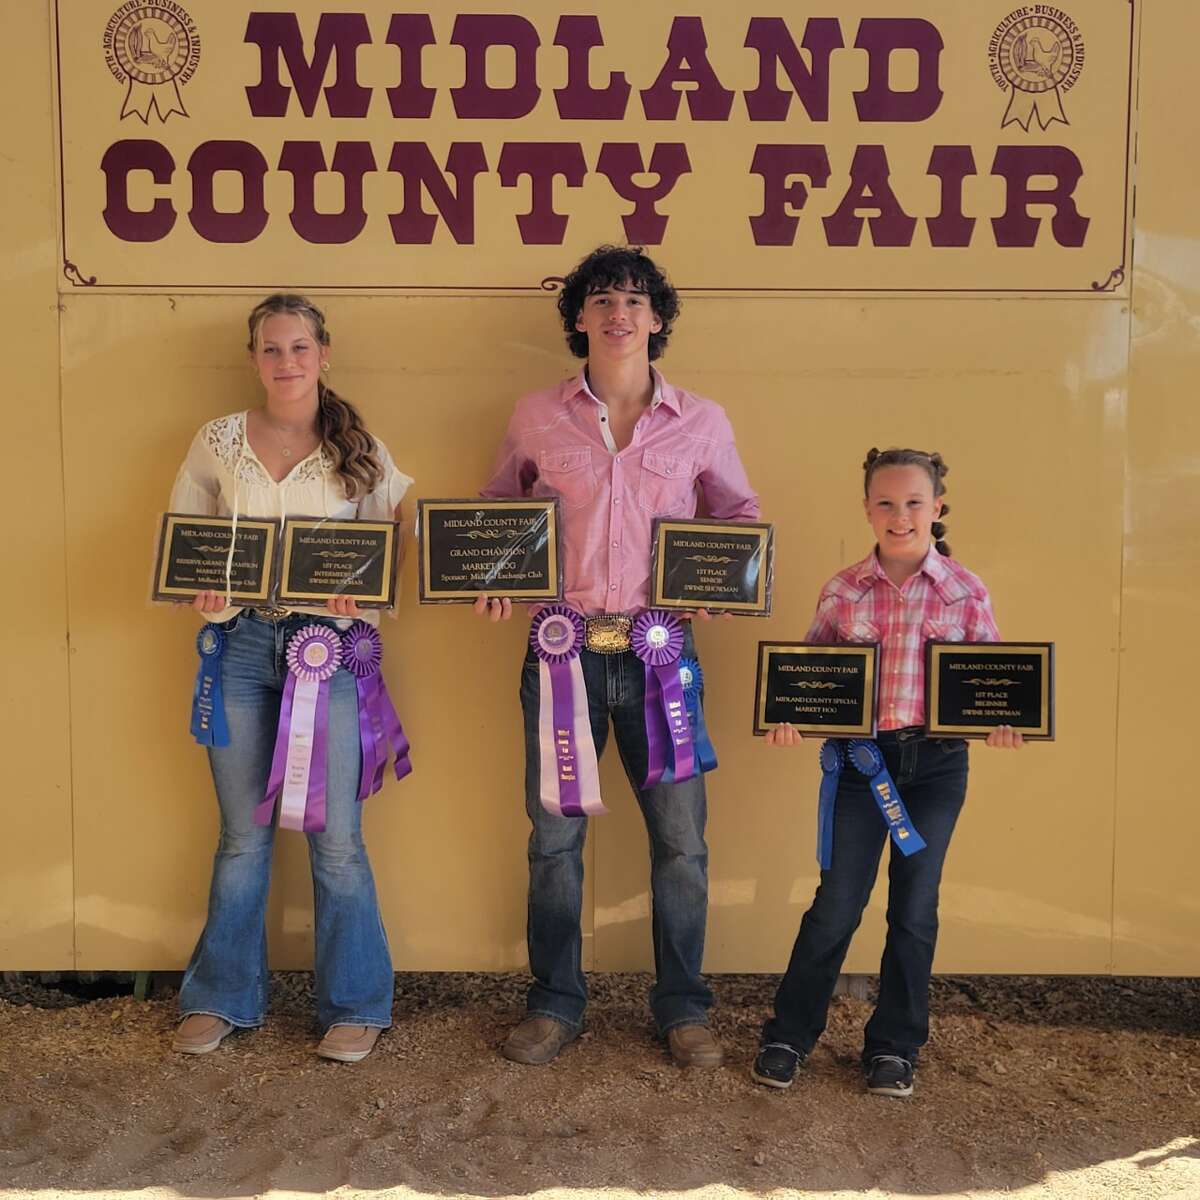 Coleman siblings, from left, Victoria Kennedy, 14, Isaiah Biers, 16, and Teagan Kennedy, 10, show their awards at the Midland County Fair this past week.